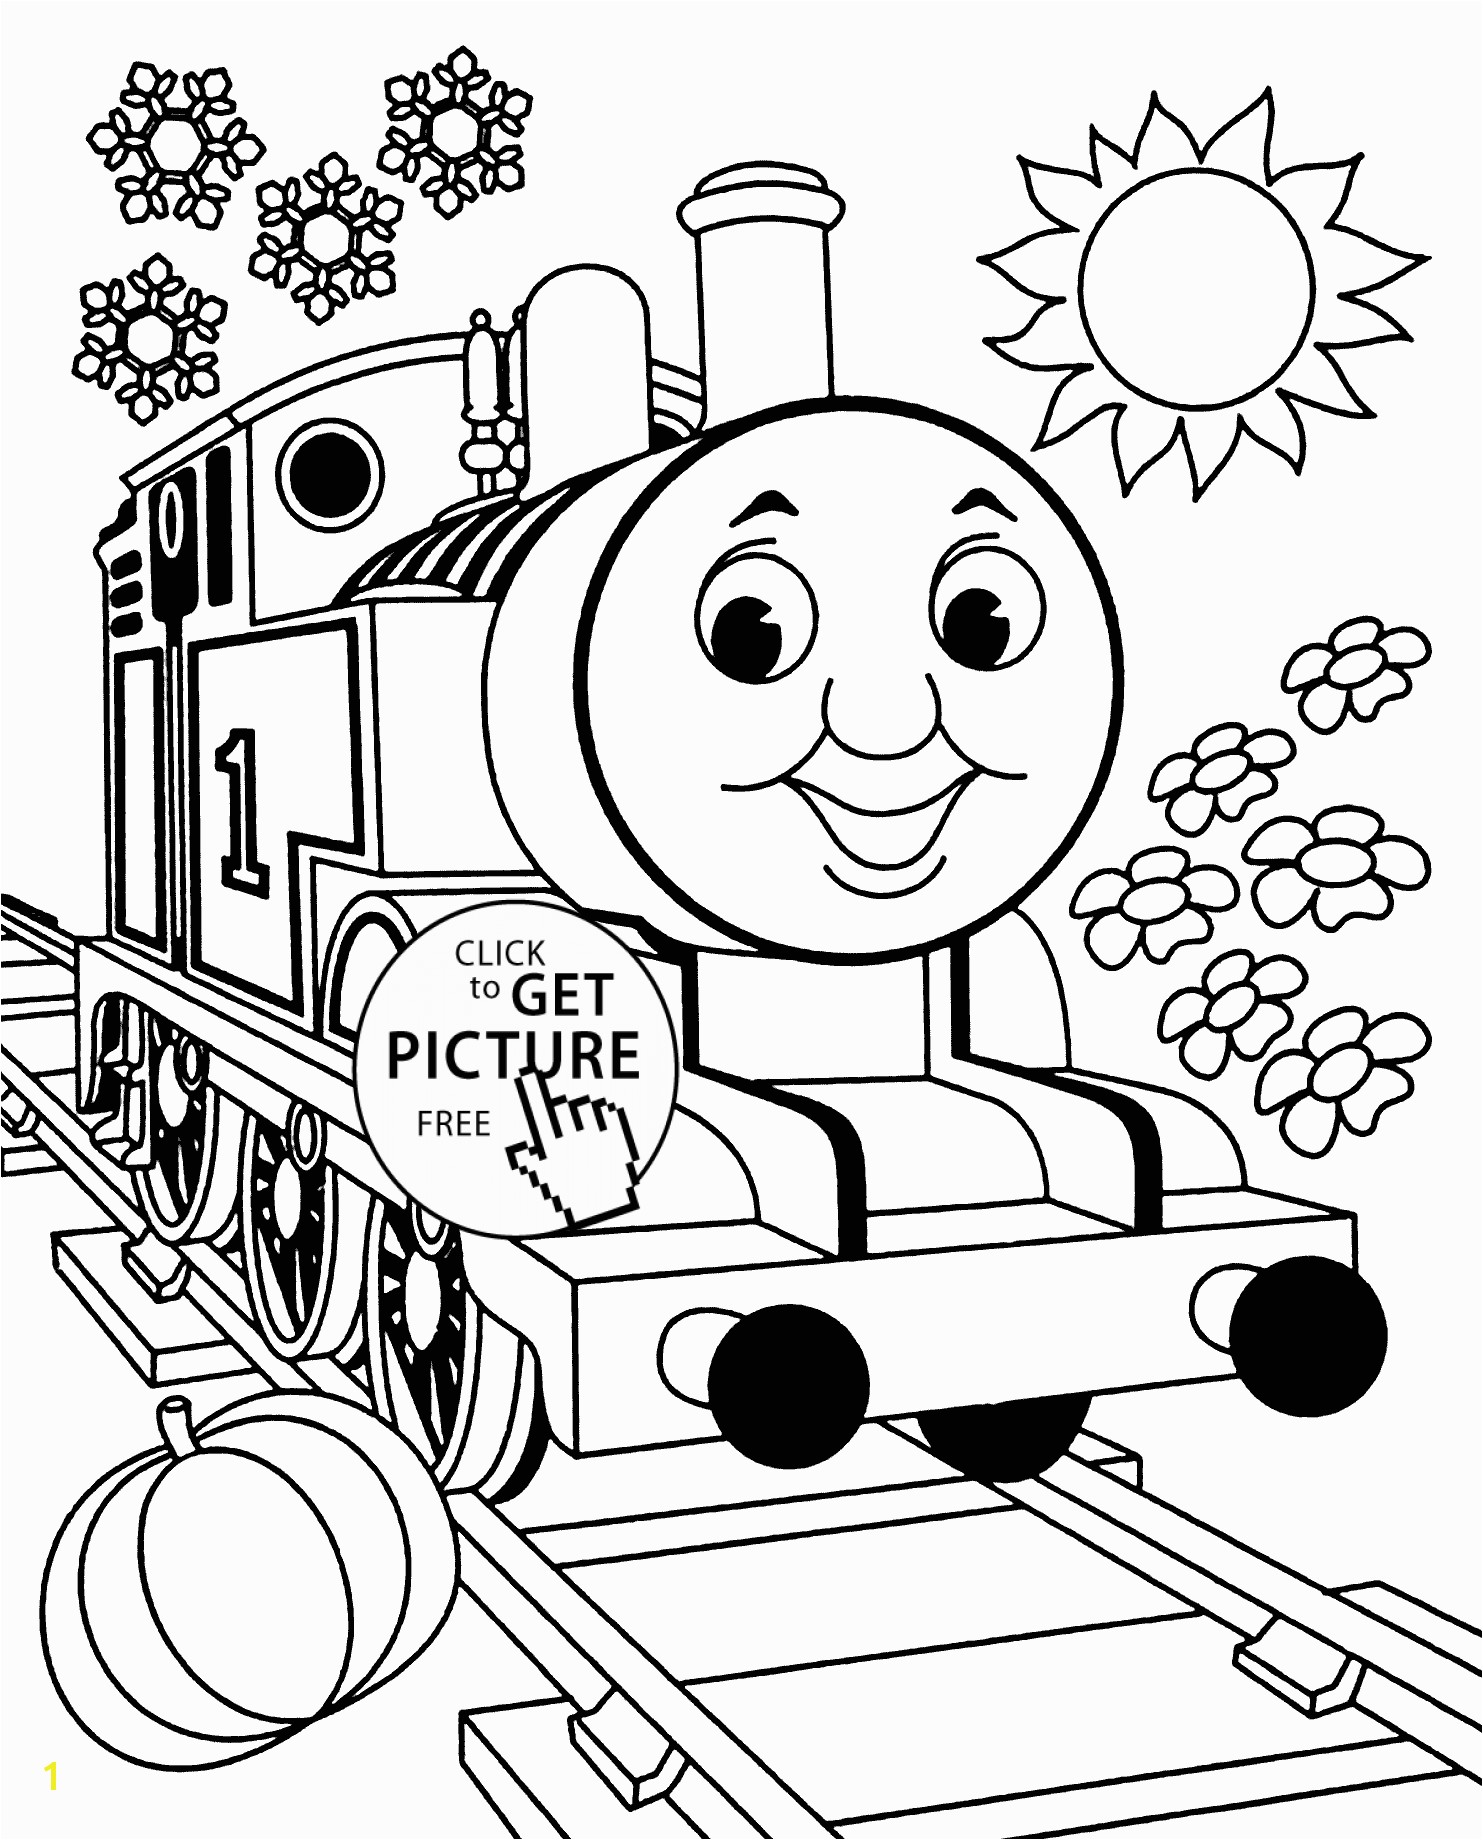 Thomas and friends coloring pages for kids printable free